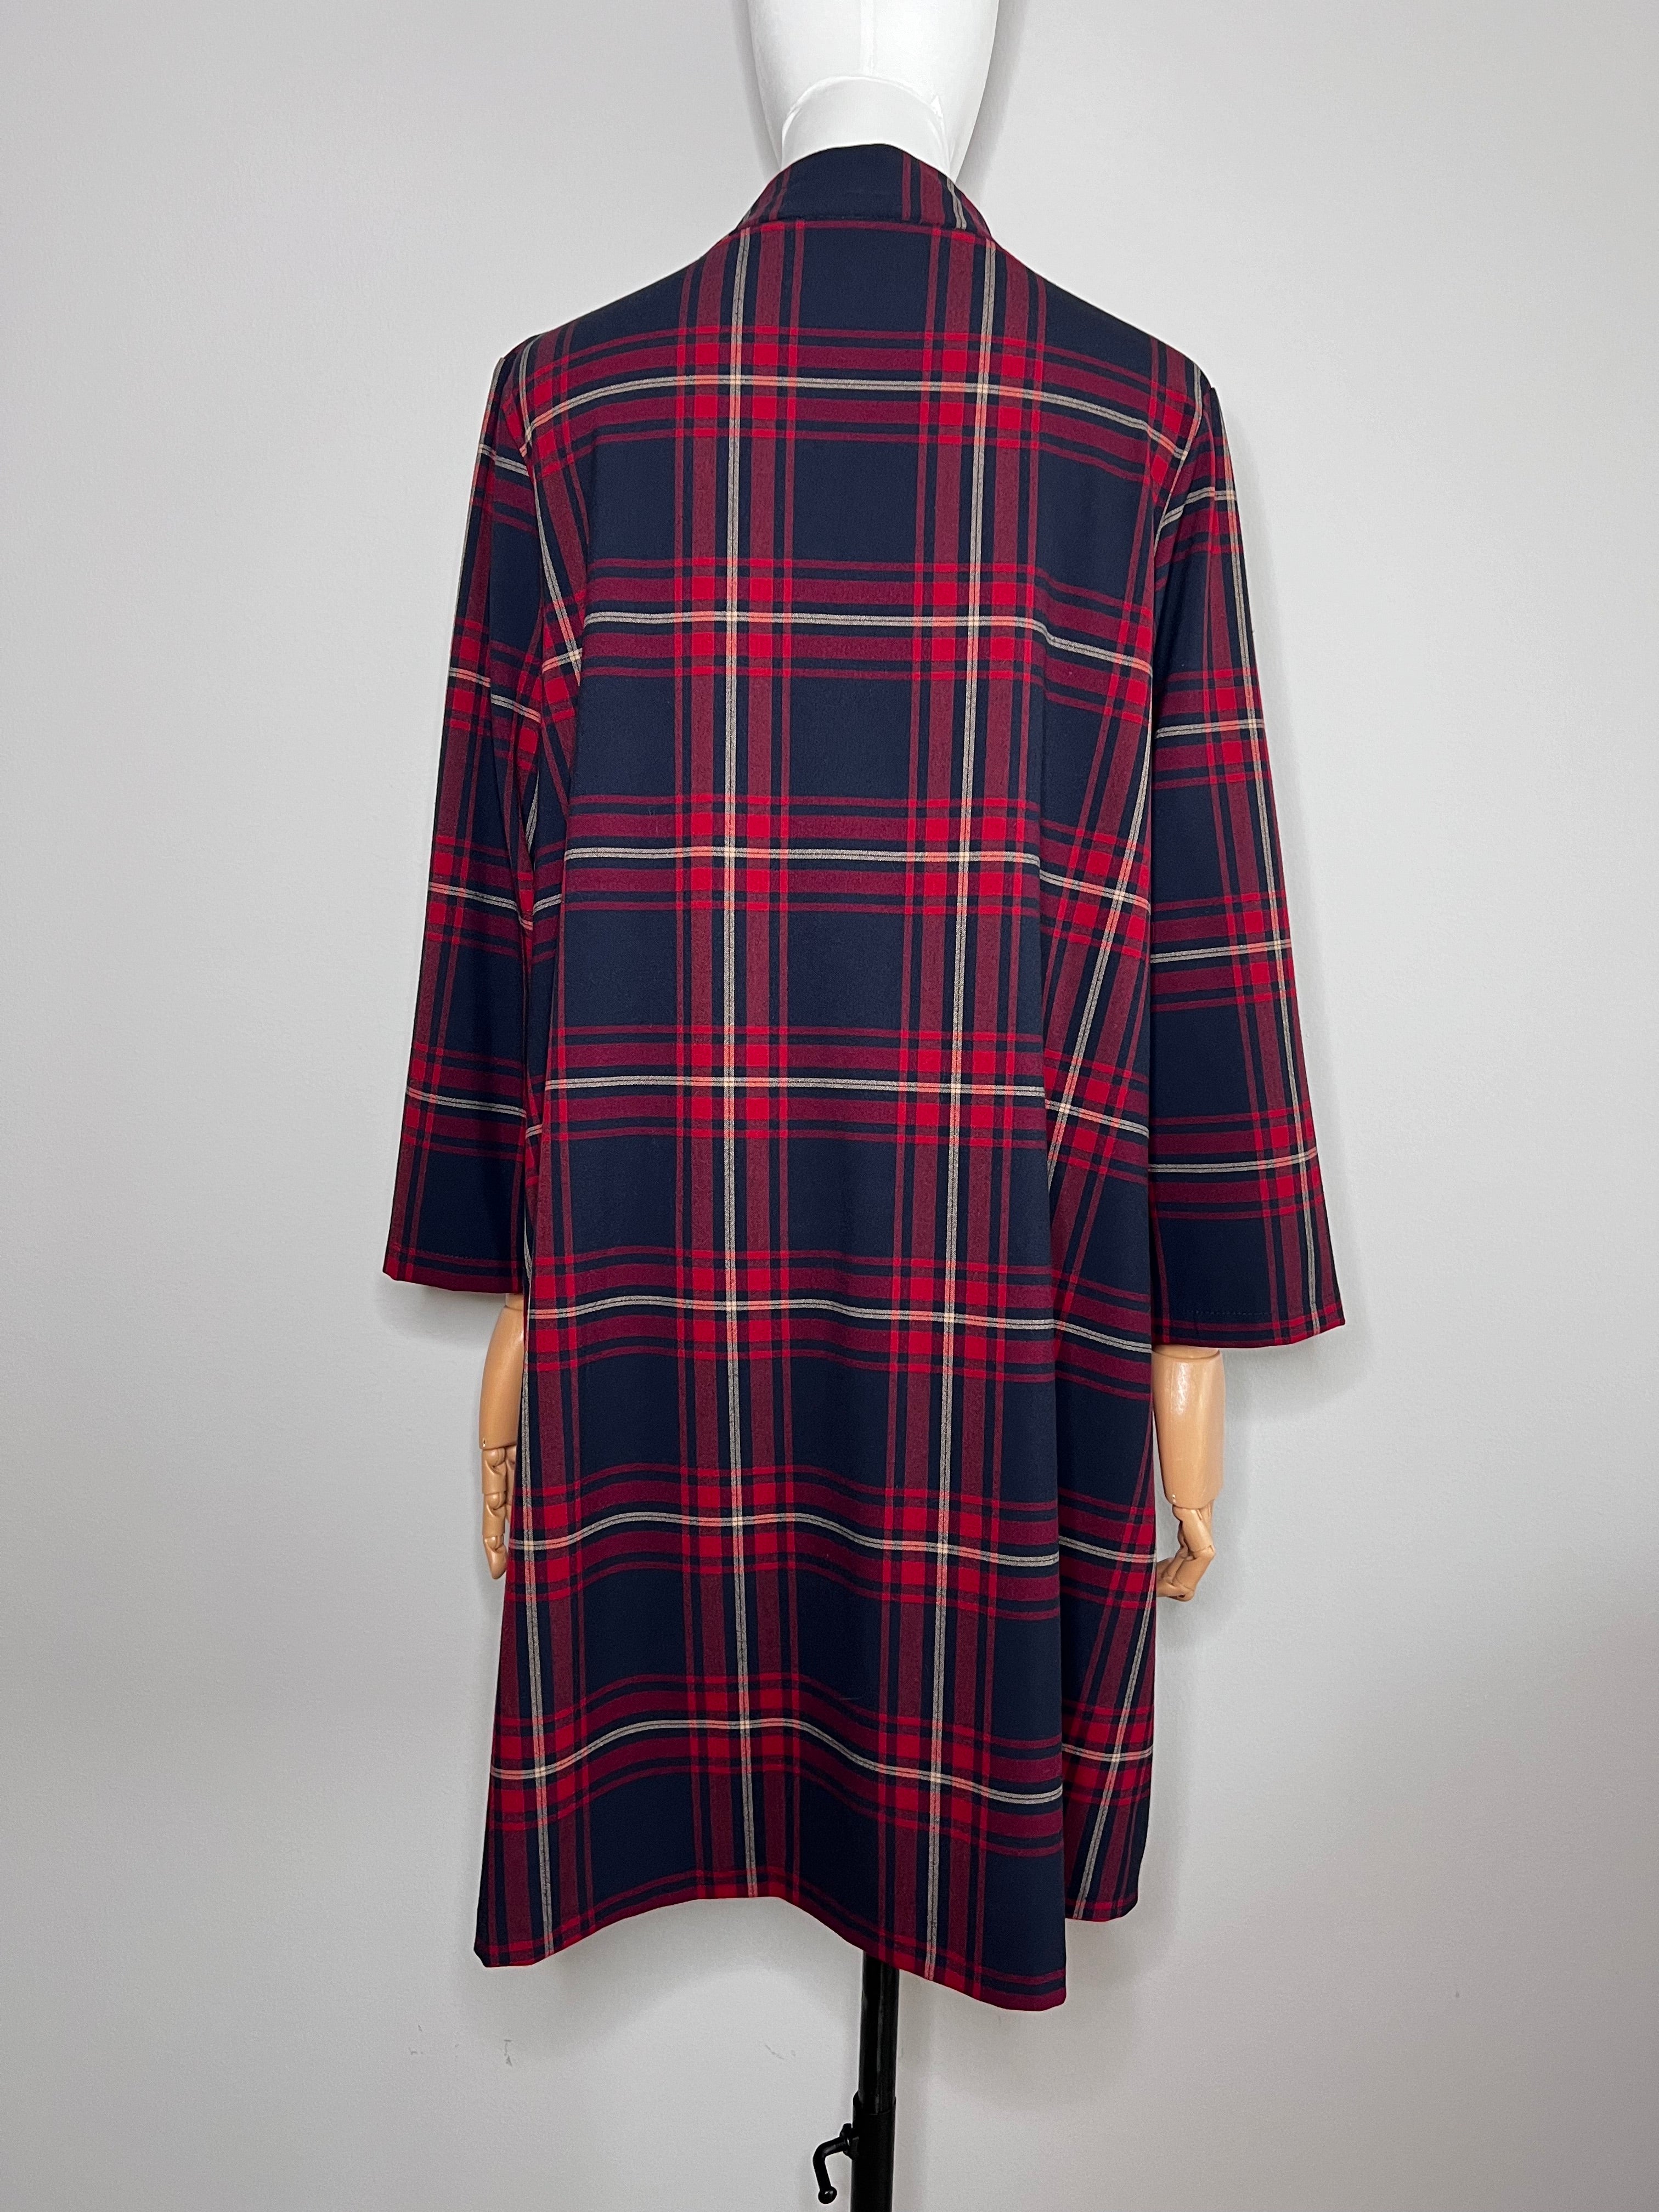 Basic plaid red & navy blue checkered dress with large gold zip front and two side pocket - ZARA